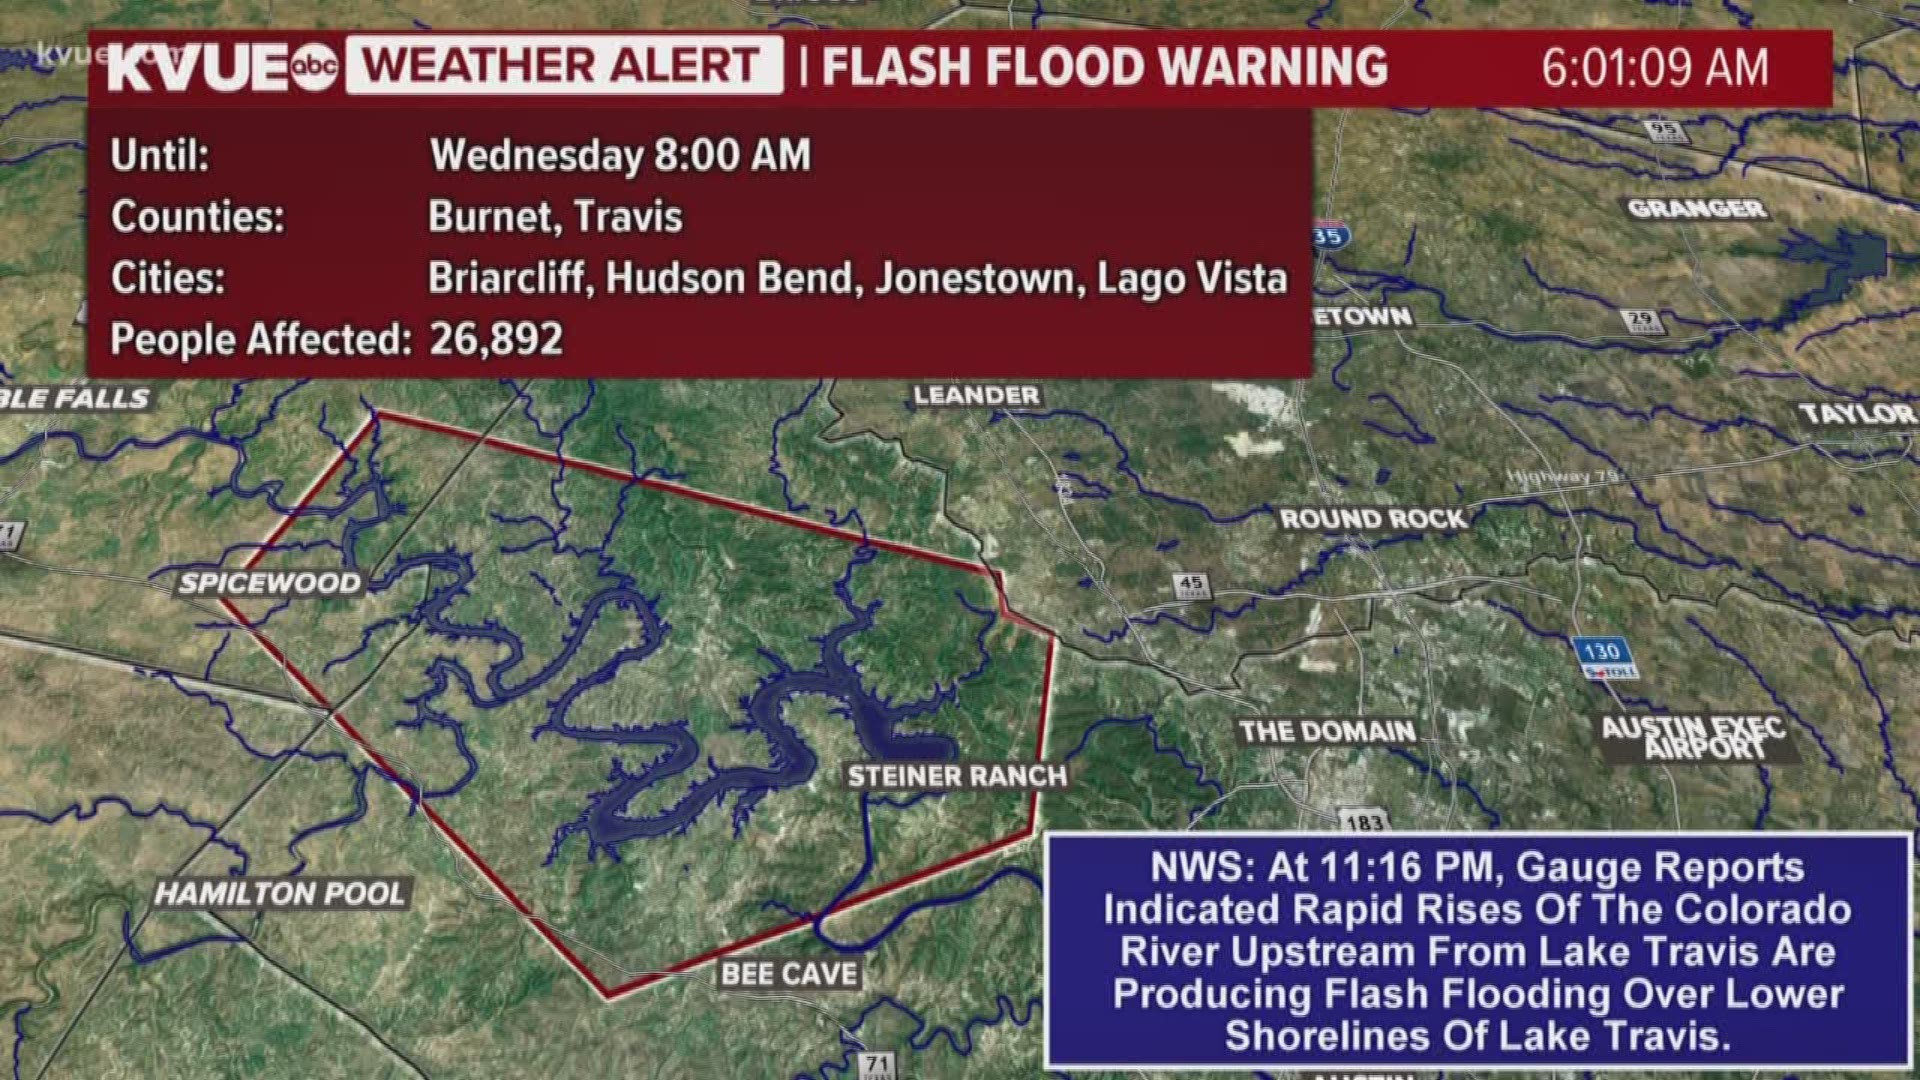 Lake Travis lake levels continue to rise following Llano River flooding